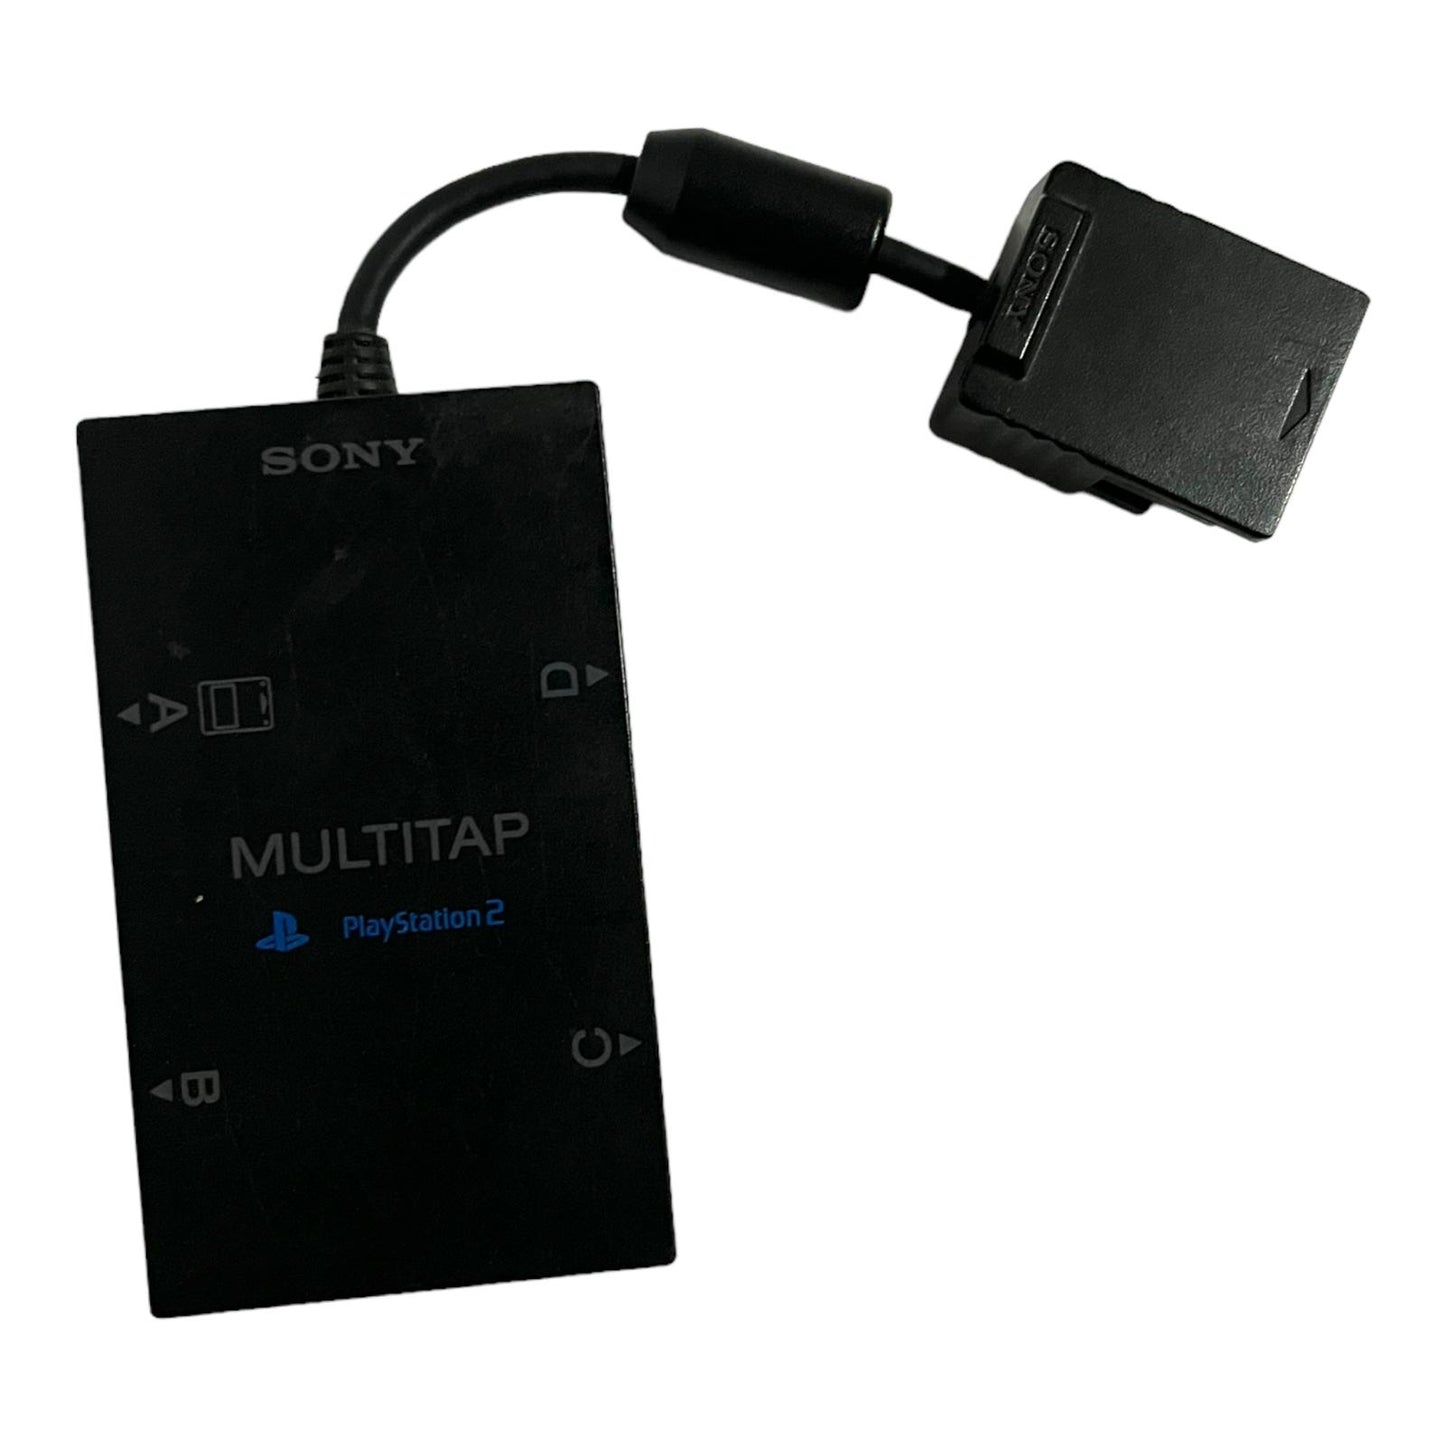 PlayStation 2 Multitap PS2